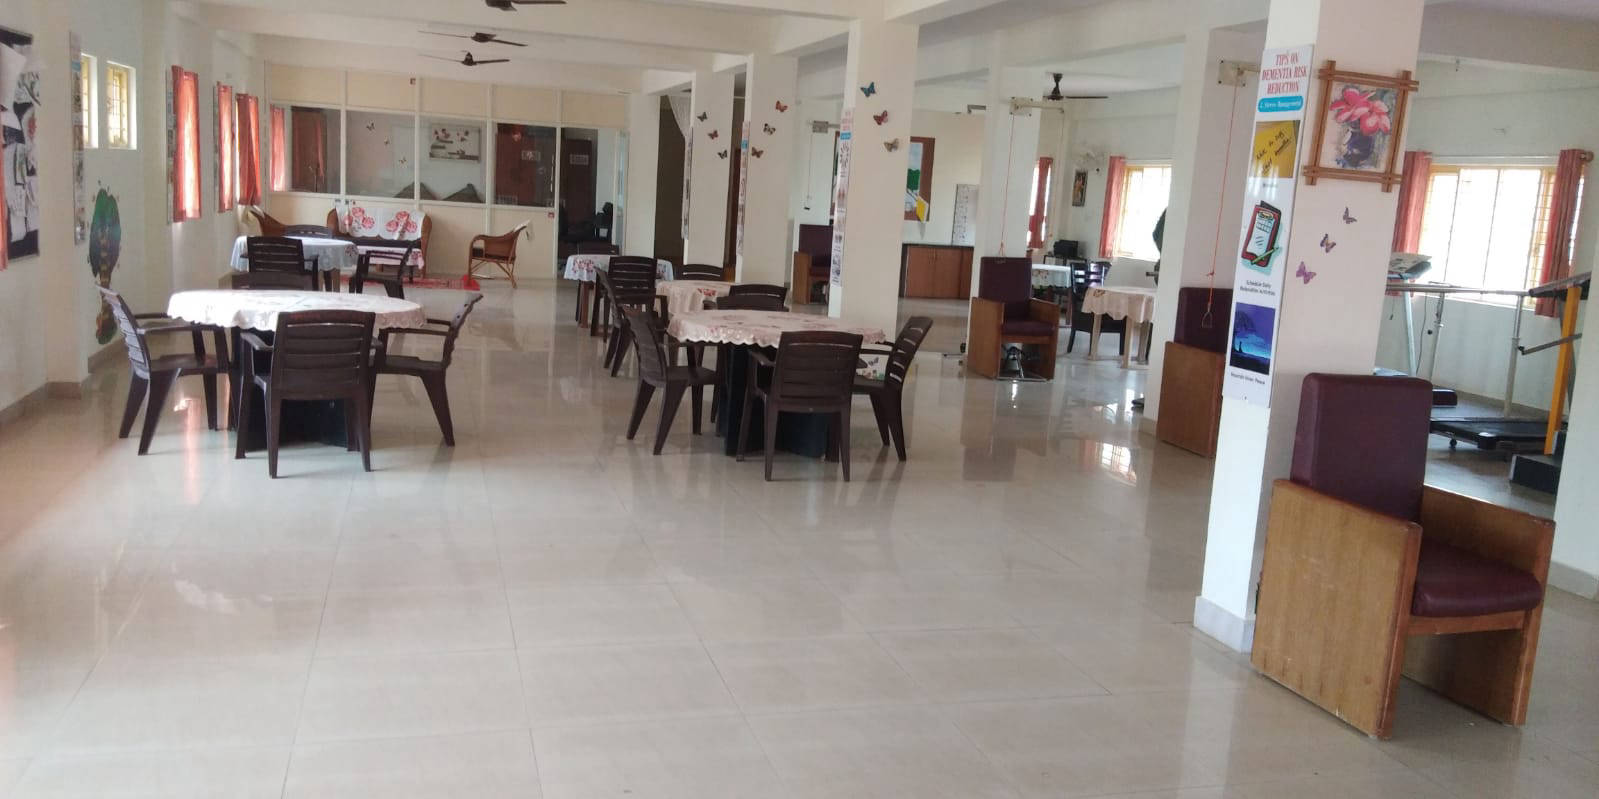 The large and spacious hall at NMT's Jayanagar Day Care Centre